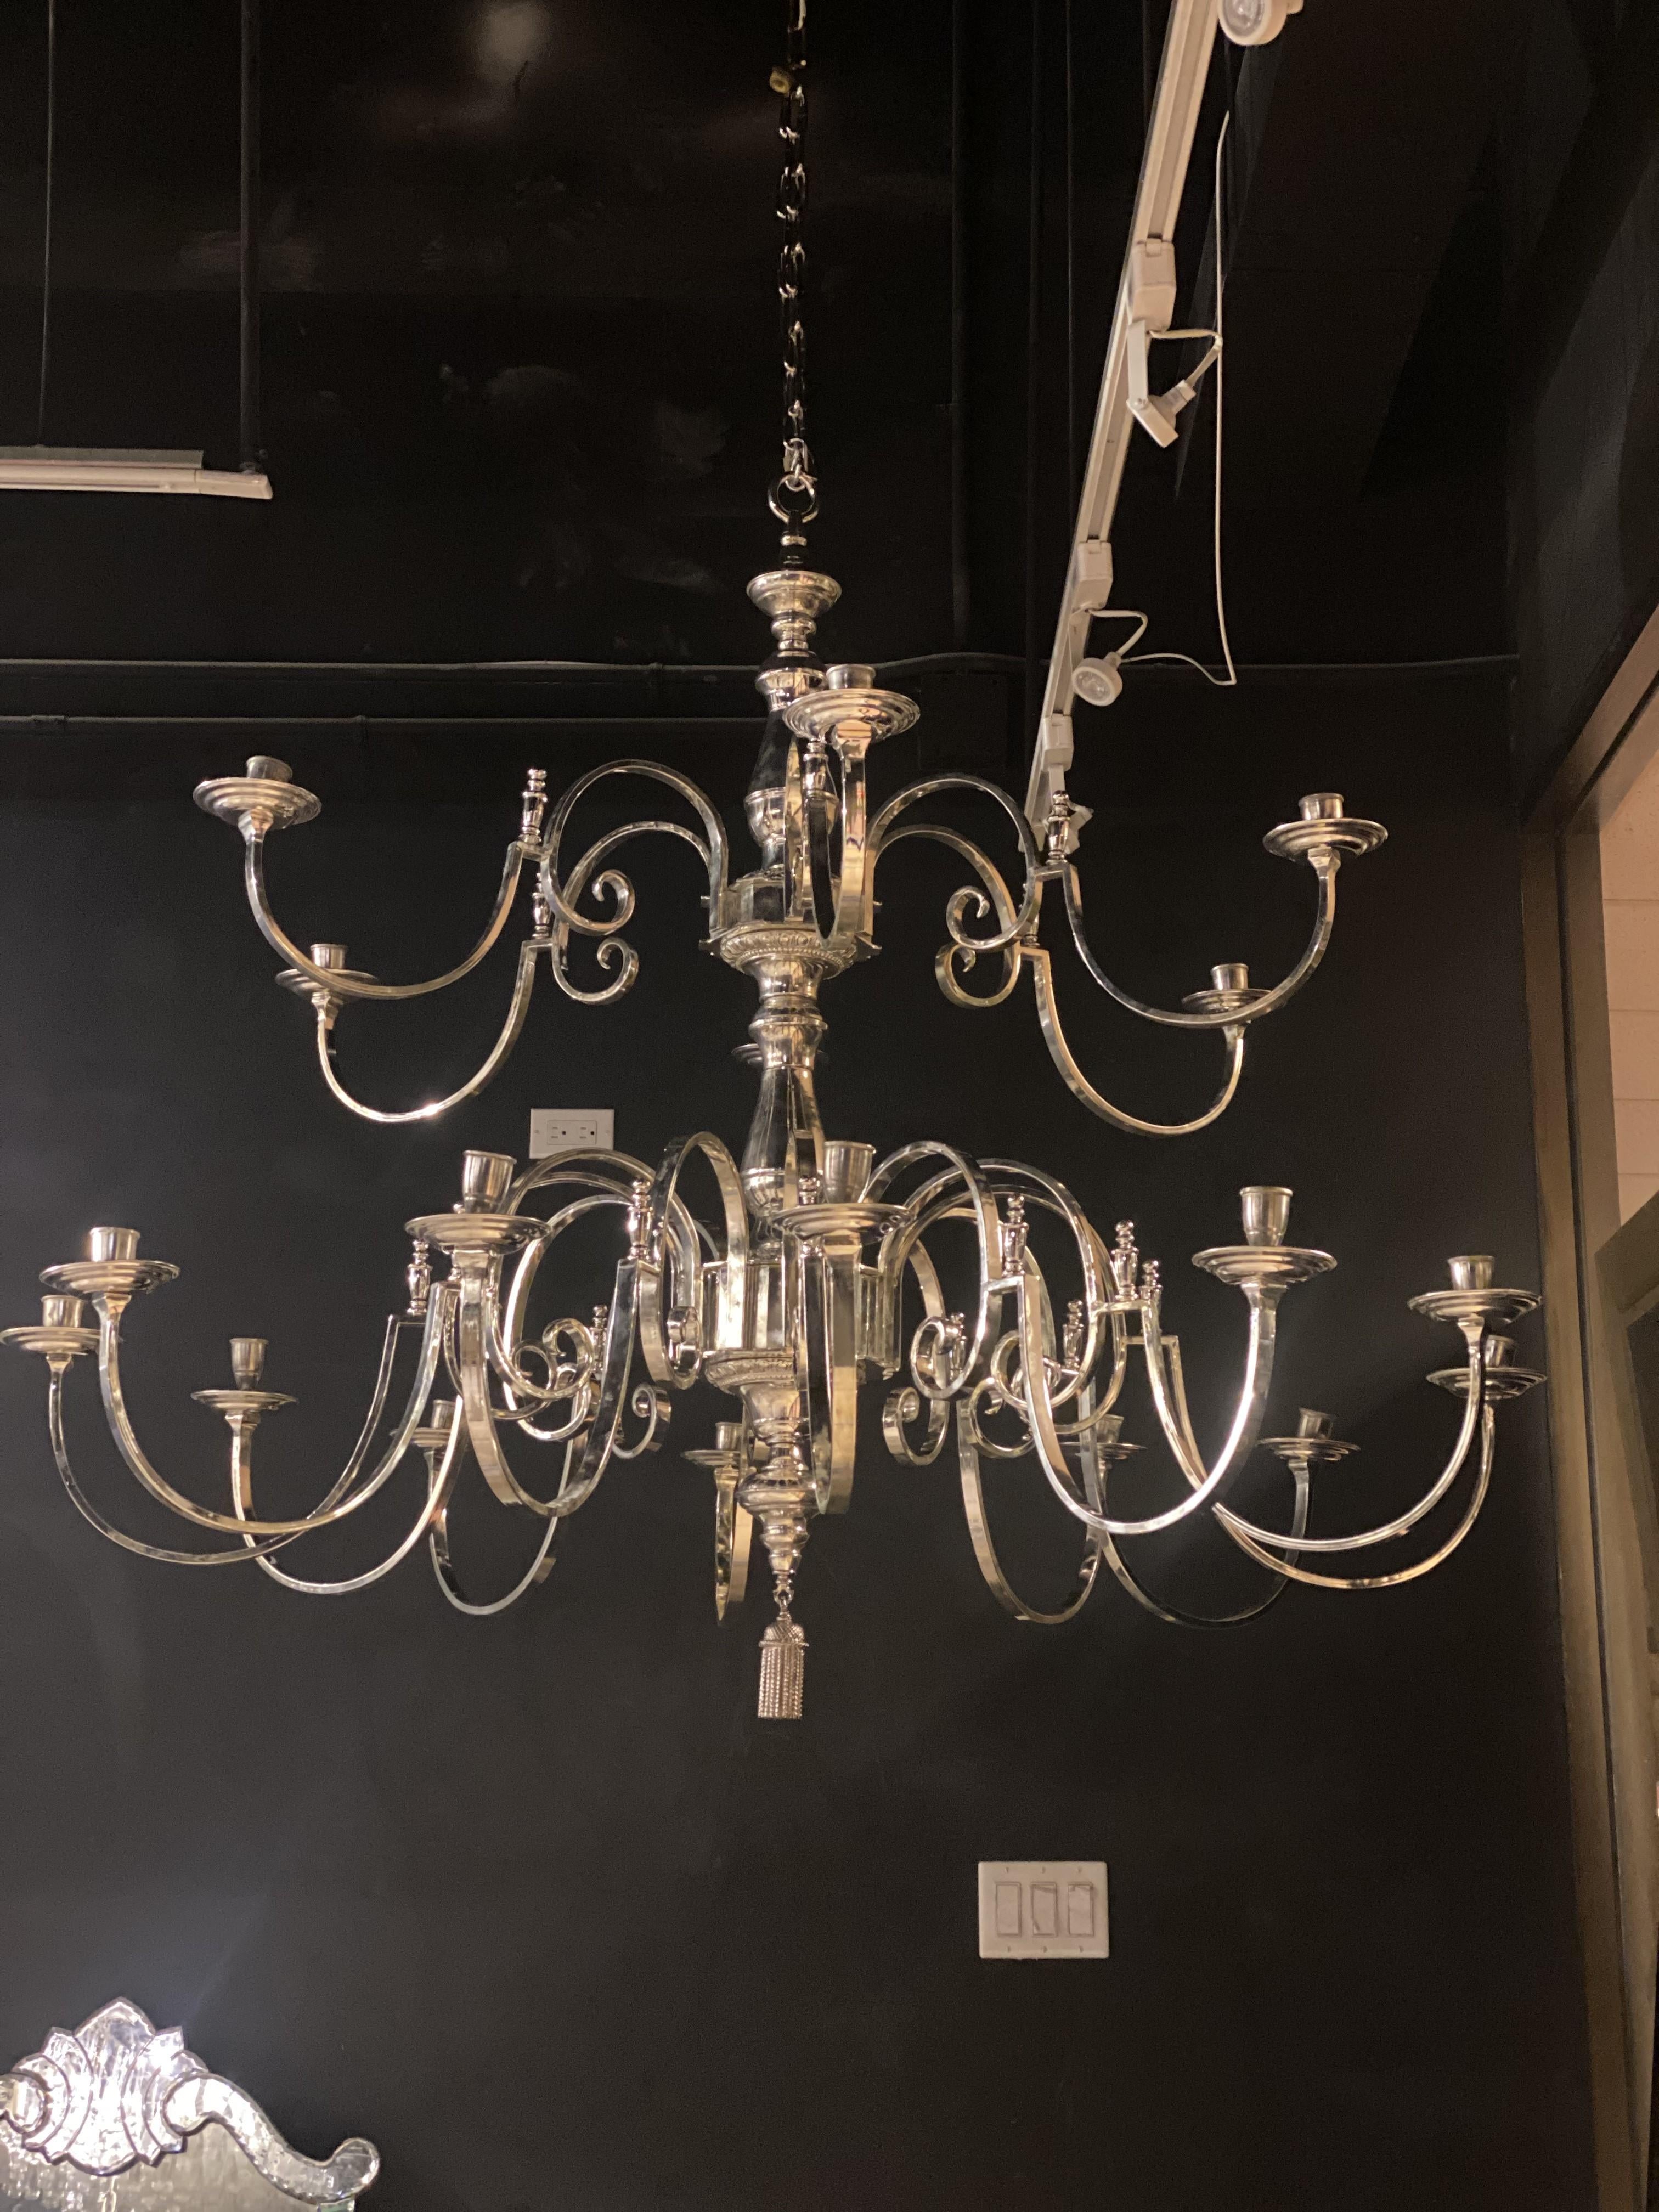 1930's English Silver Plated Chandelier with 18 lights In Good Condition For Sale In New York, NY